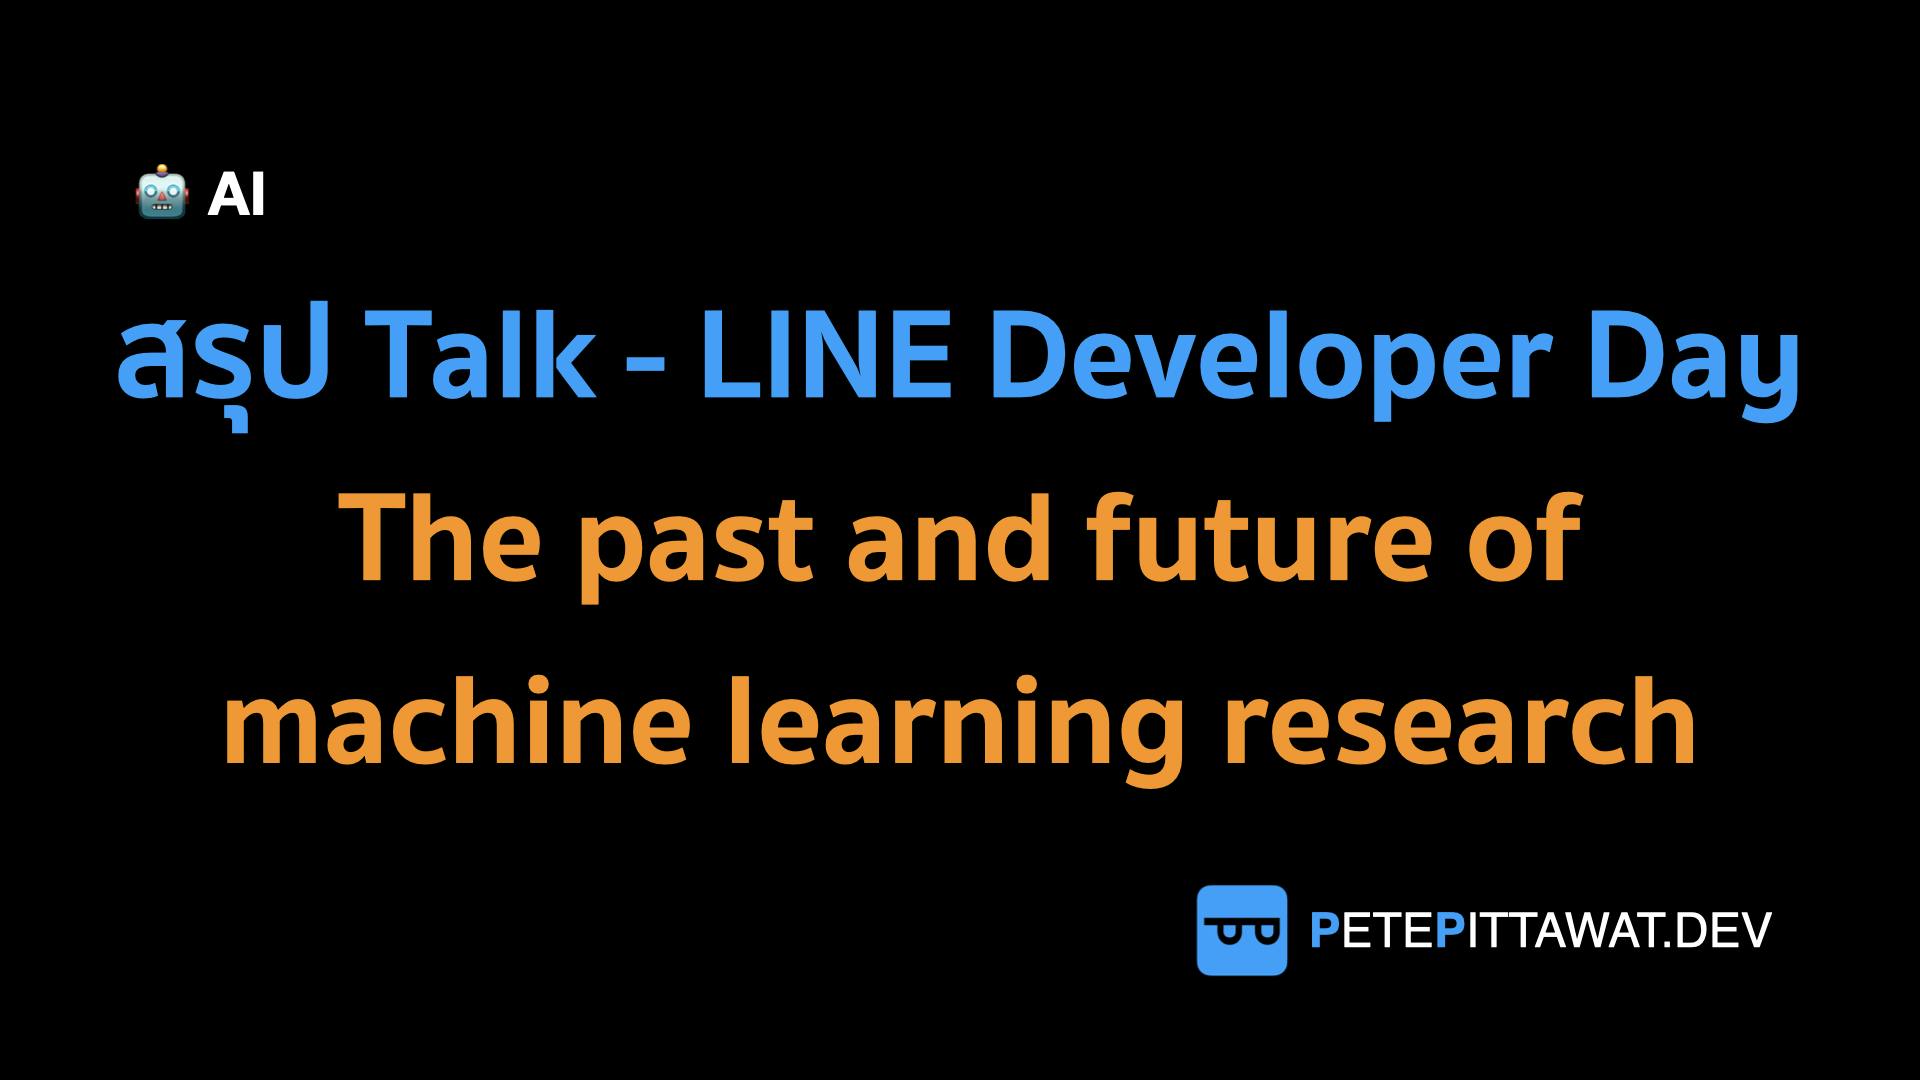 Cover Image for Review: LINE Developer Day 2020 - The past and future of machine learning research